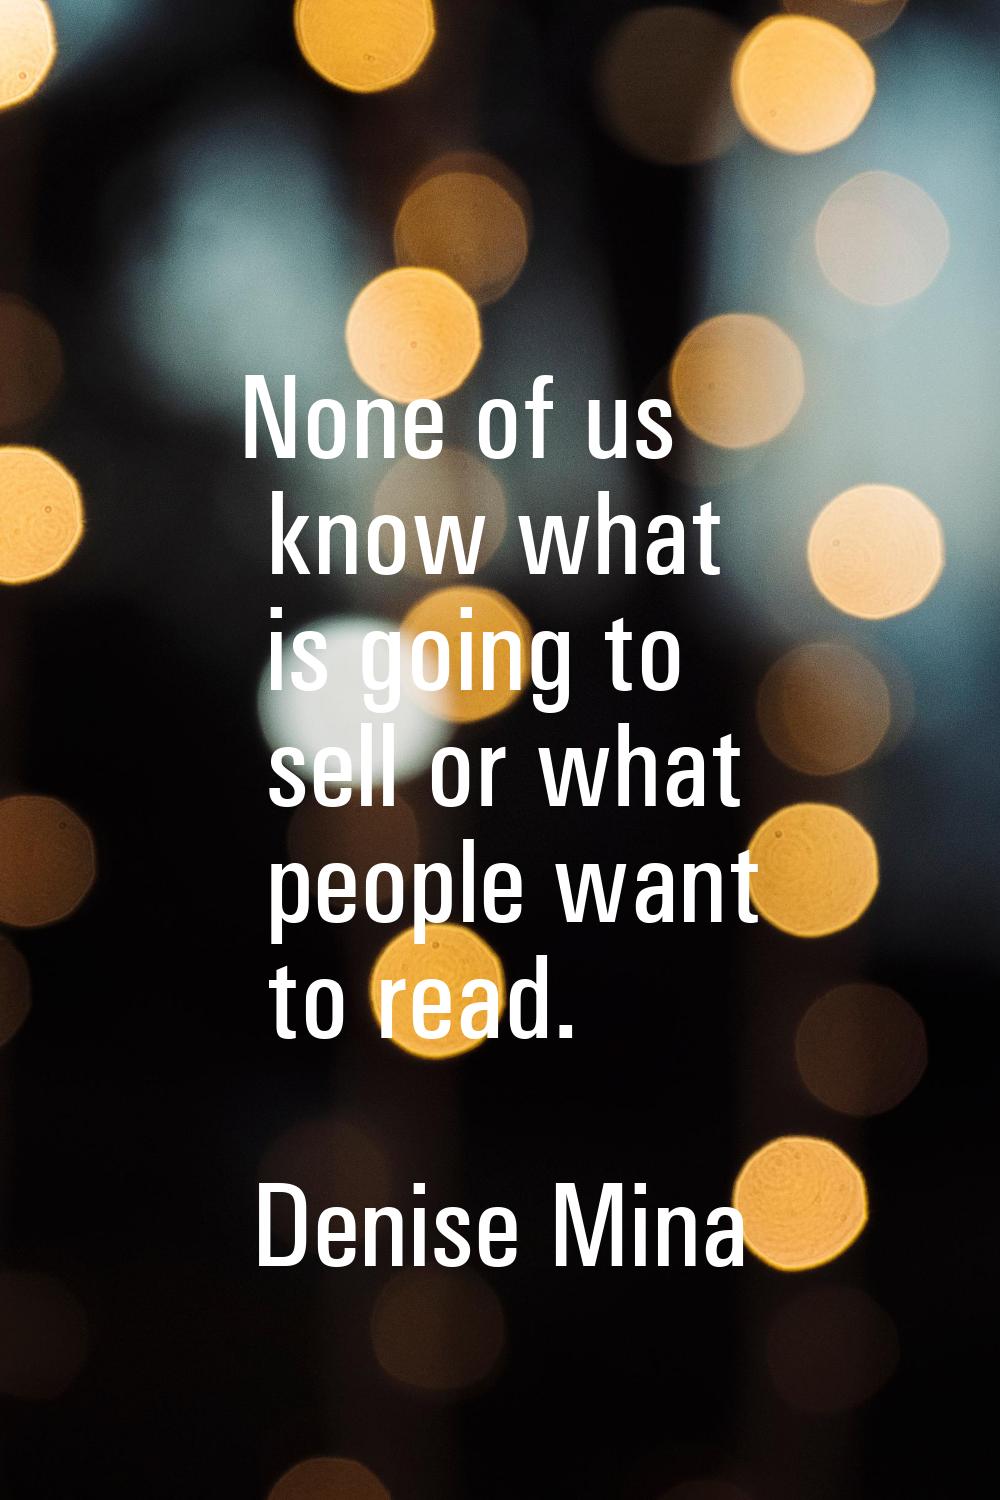 None of us know what is going to sell or what people want to read.